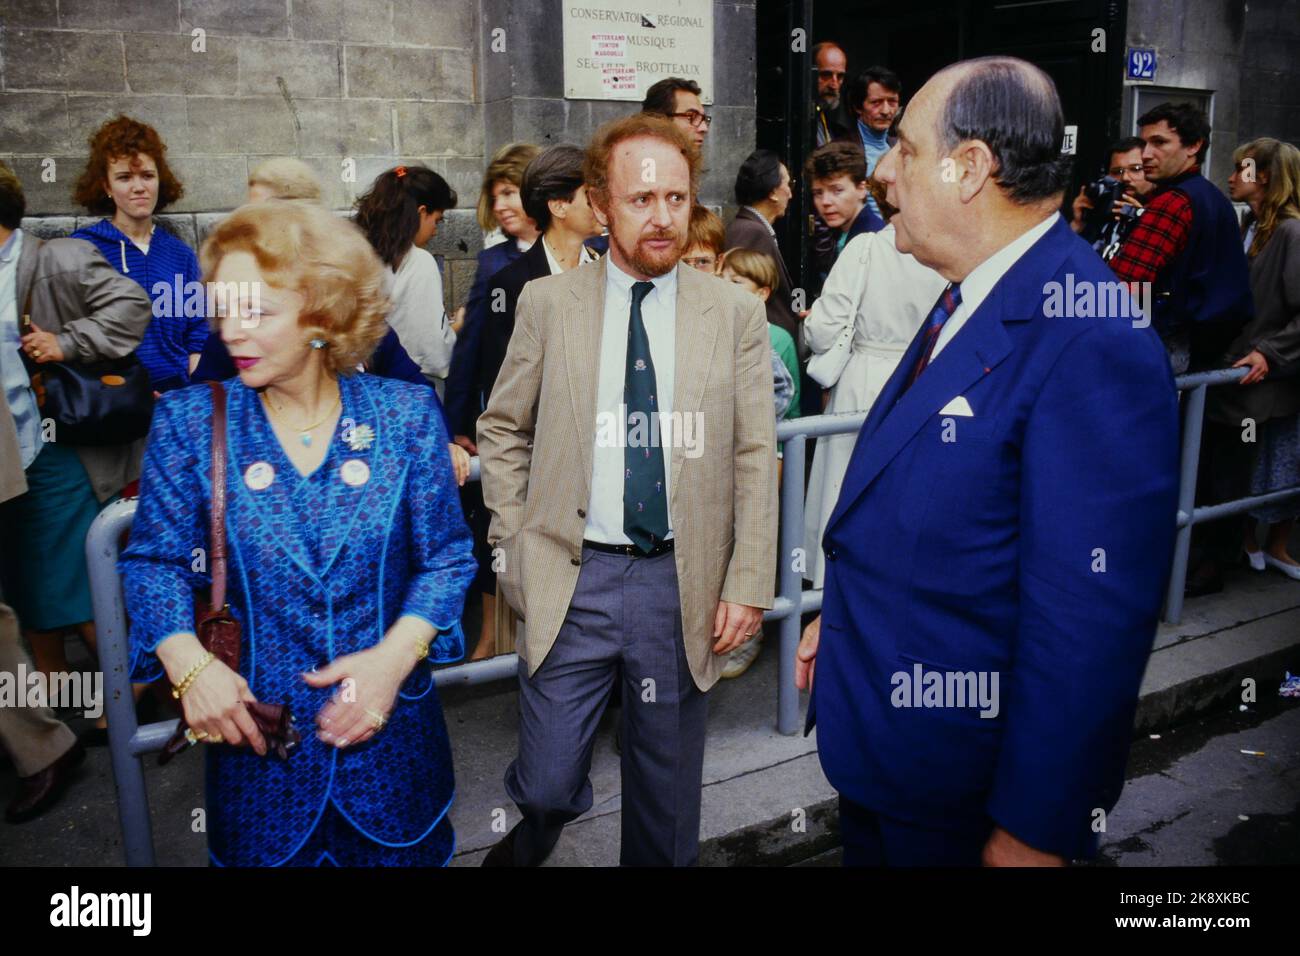 Raymond Barre at the Pole station on the occasion of the first round of French presidential elections, Lyon, France, 1988 Stock Photo